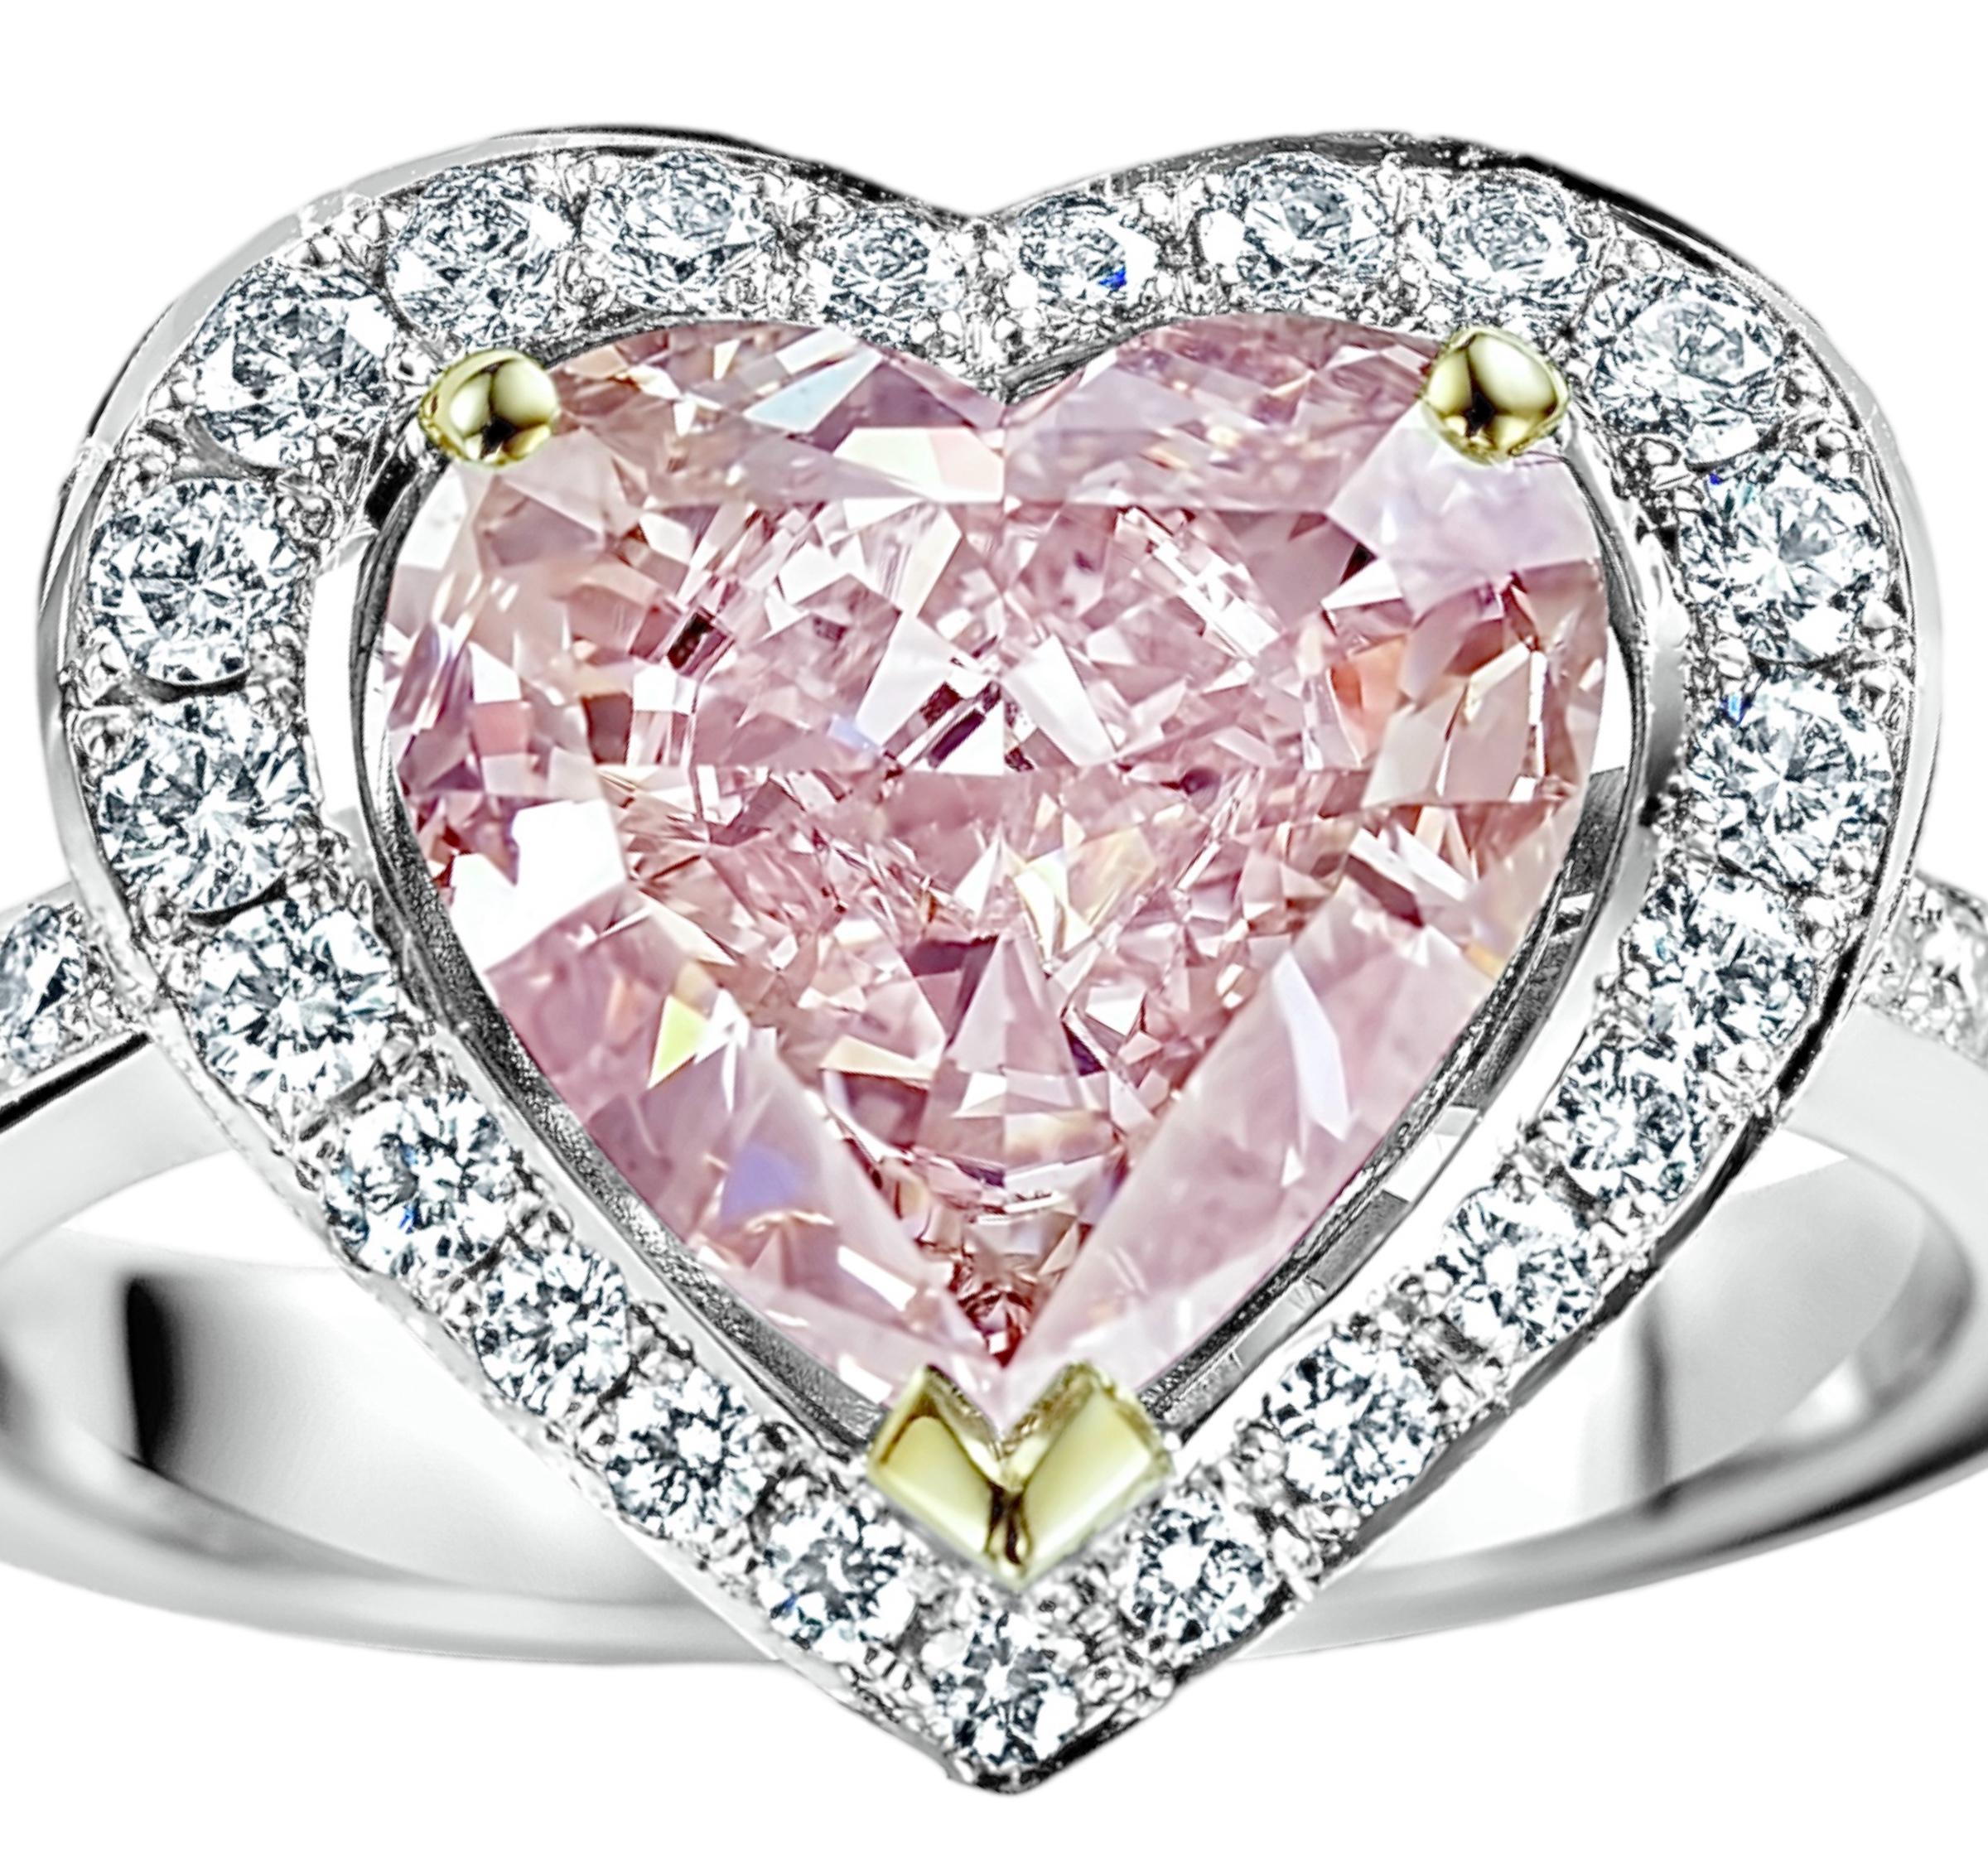 Magnificant Colmpletely Hand Made 18 kt. White Gold Enhanced Pinkish Heart 2.78 ct. Diamond Ring

Heart modified brilliant, Fancy  pink enhanced diamond , 2.78 ct. VVS1
Comes with GIA certificate 

Brilliant cut diamonds together approx. 0.78